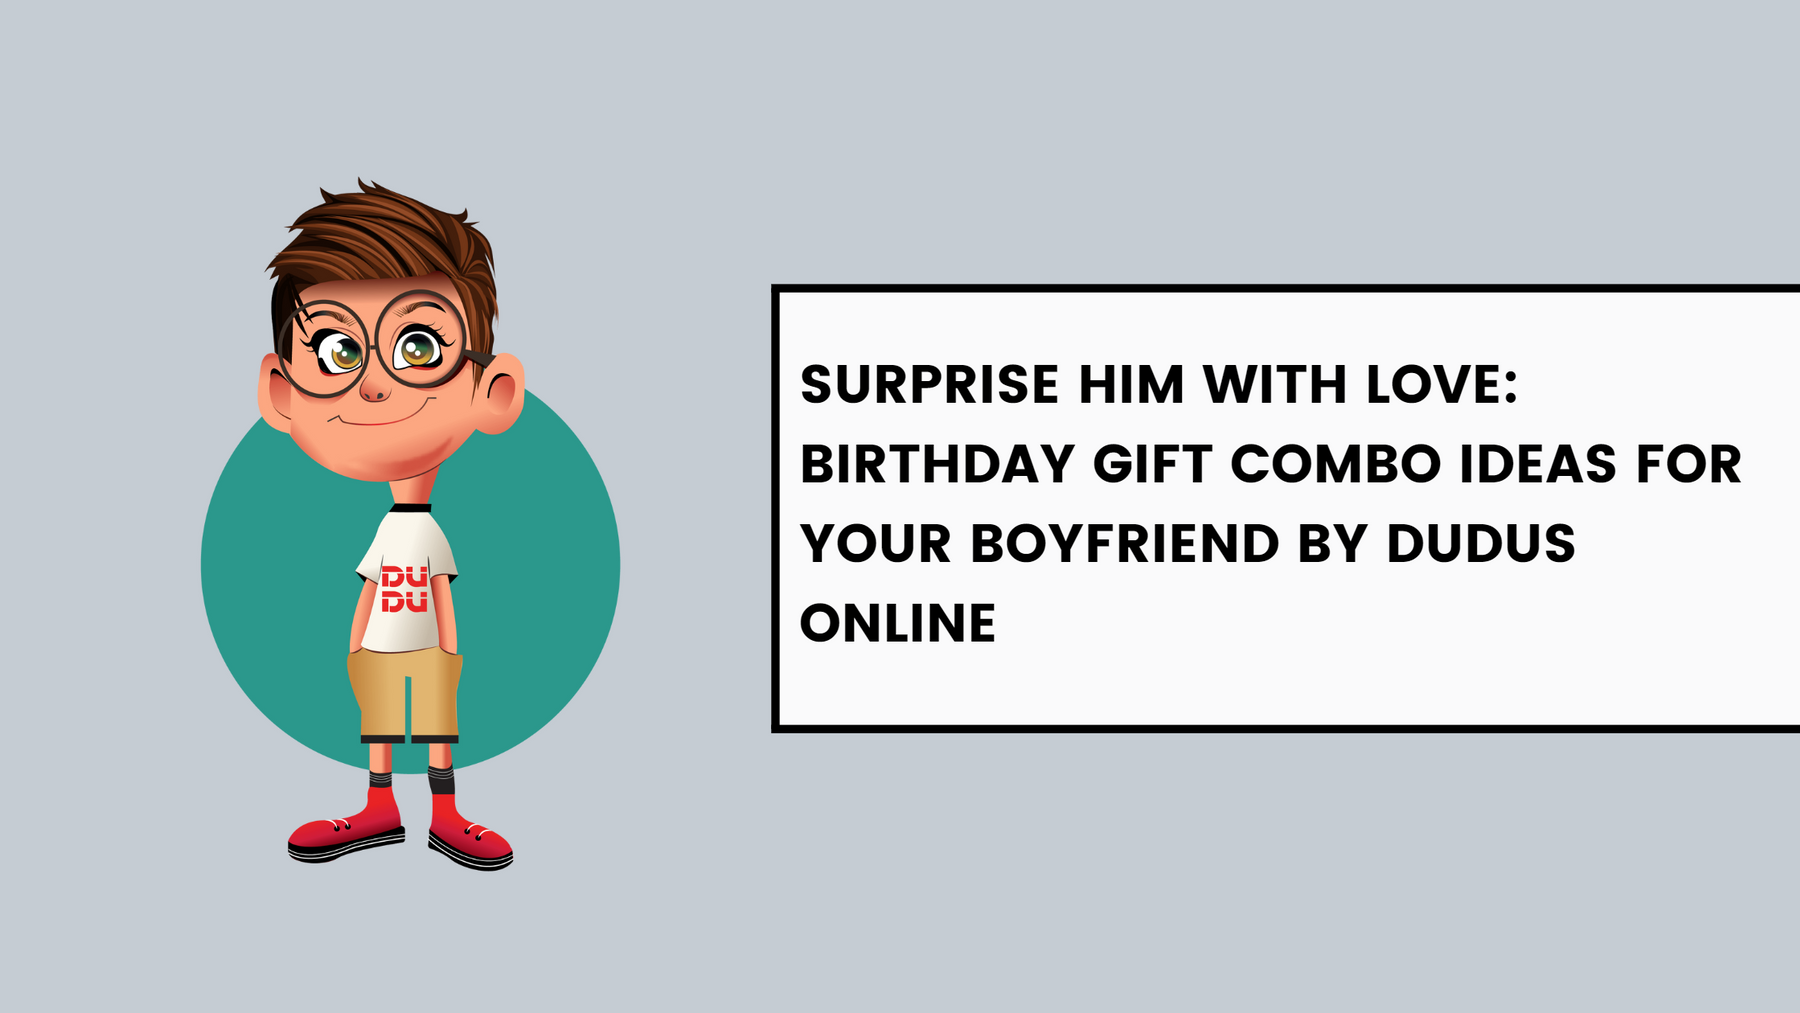 Surprise Him With Love: Birthday Gift Combo Ideas For Your Boyfriend By Dudus Online